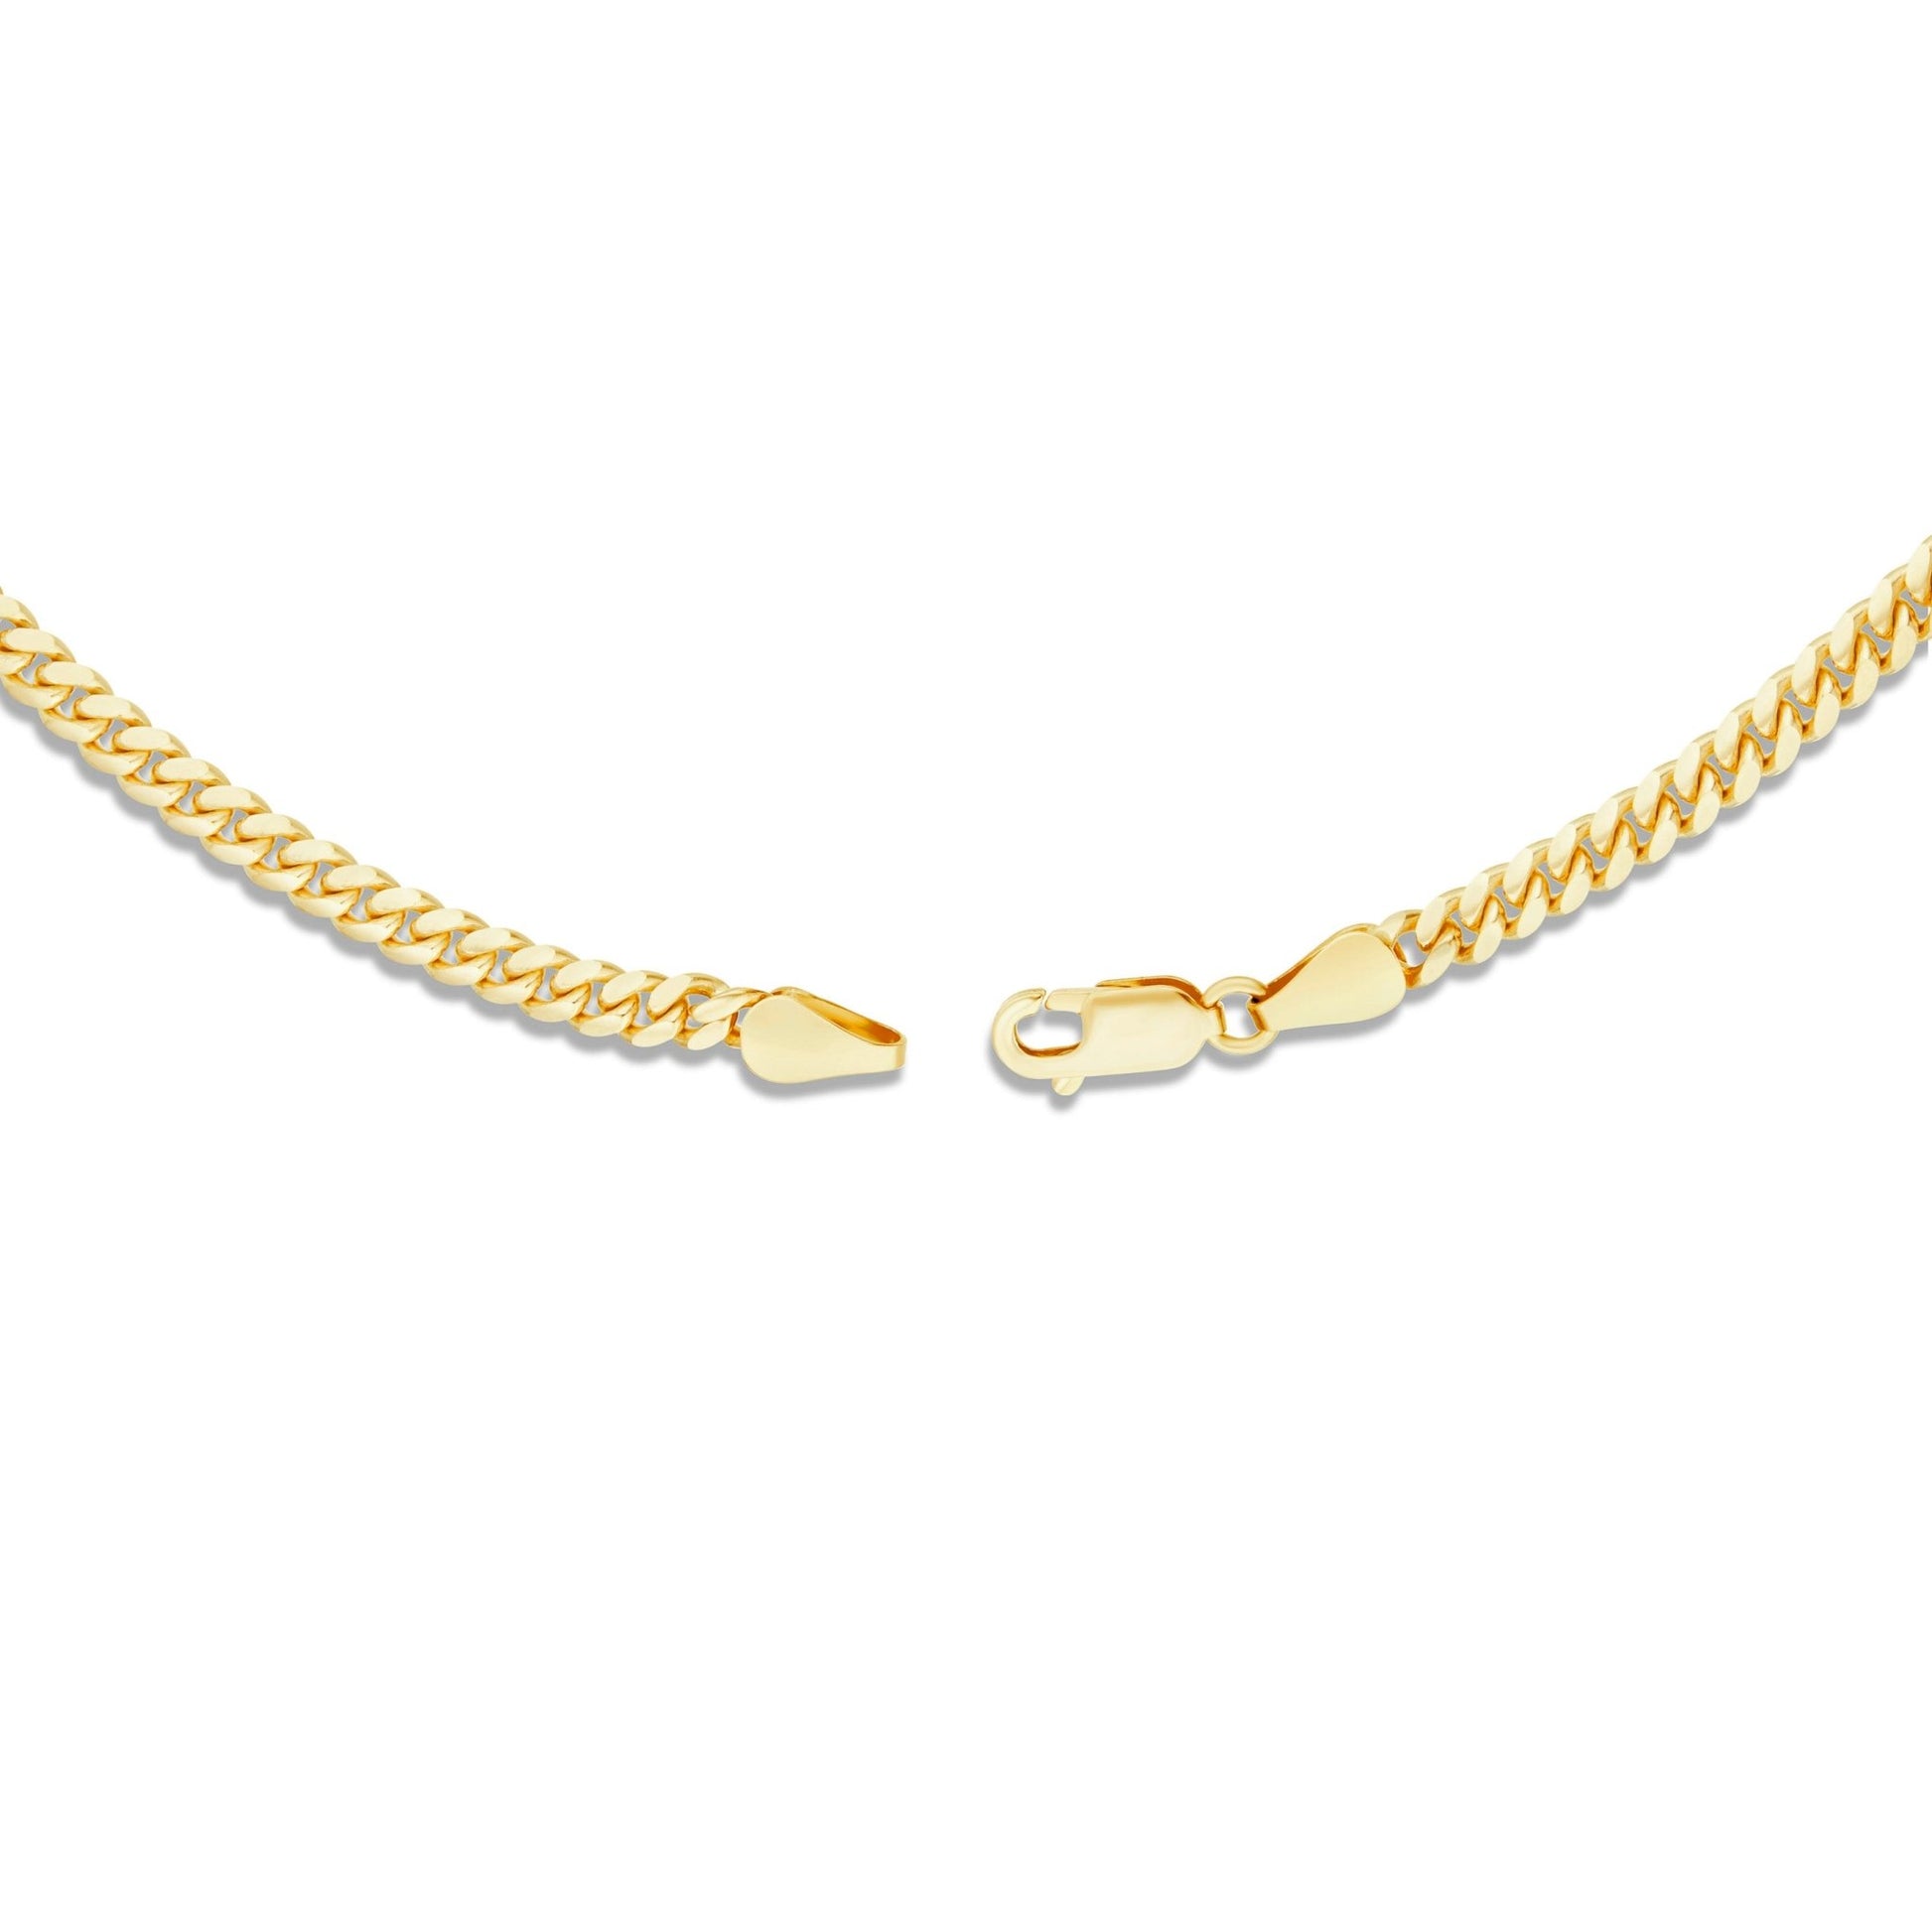 14K Solid Gold Cuban Chain, 2.5mm